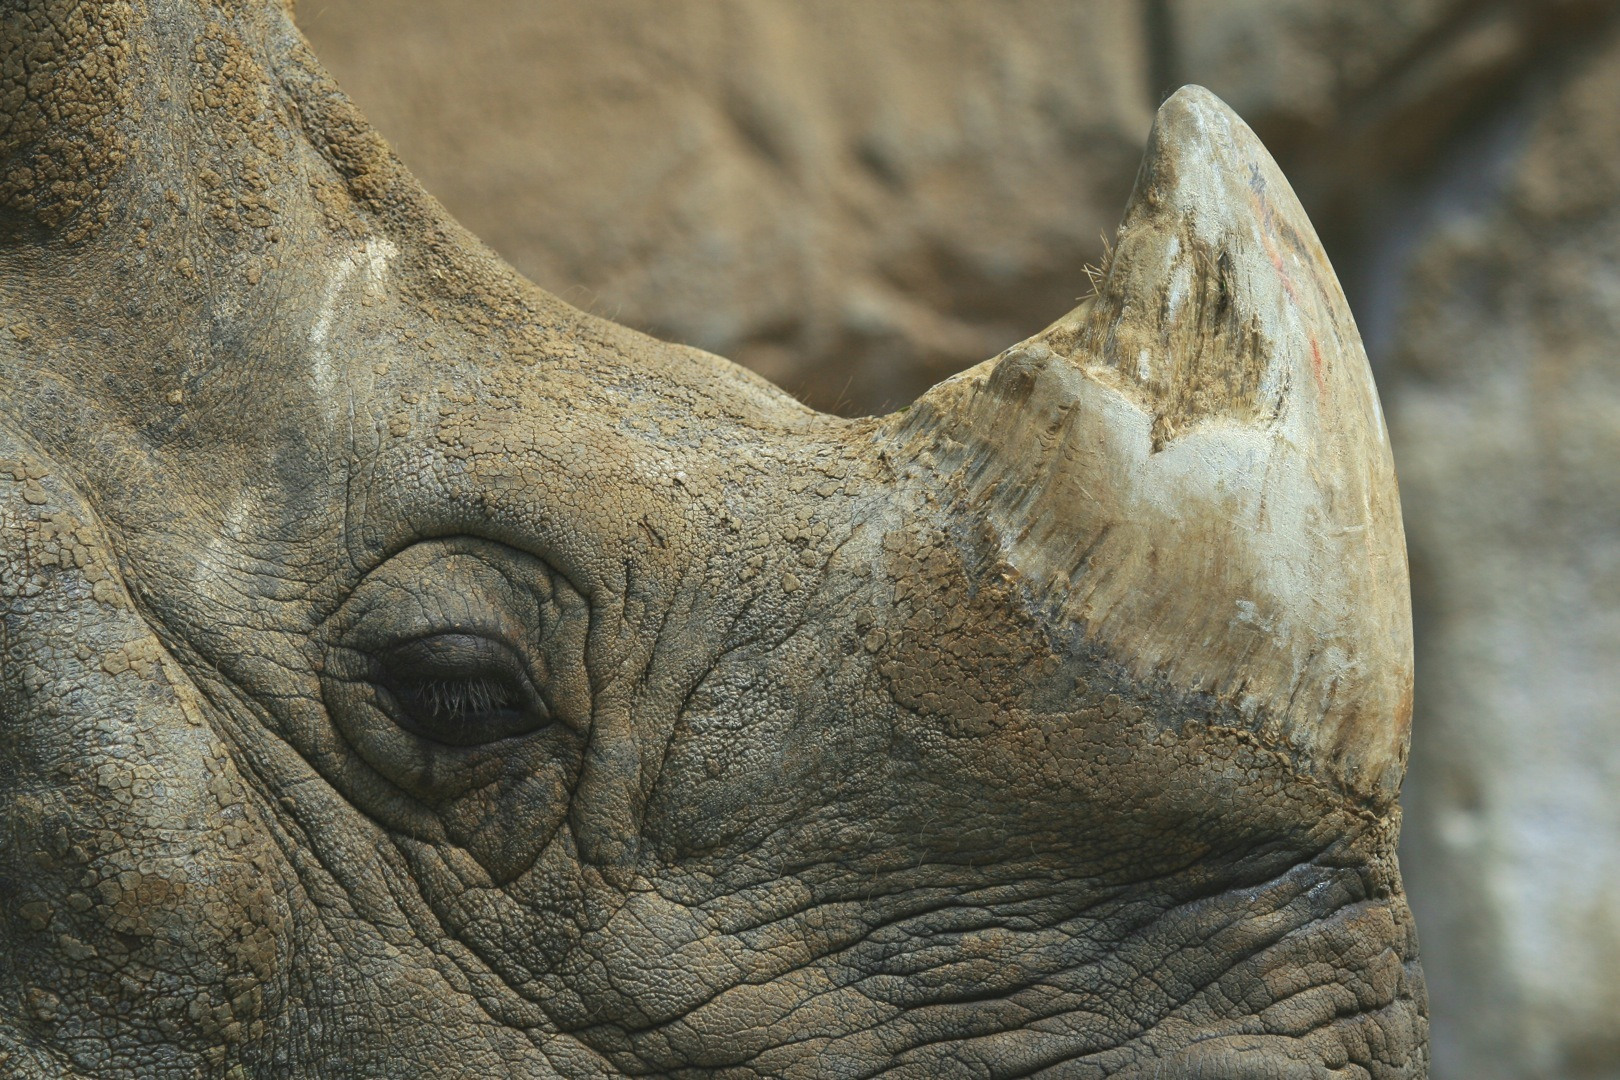 No, Legalizing Rhino Horn Probably Won't Save Animals from Poaching, Smart  News